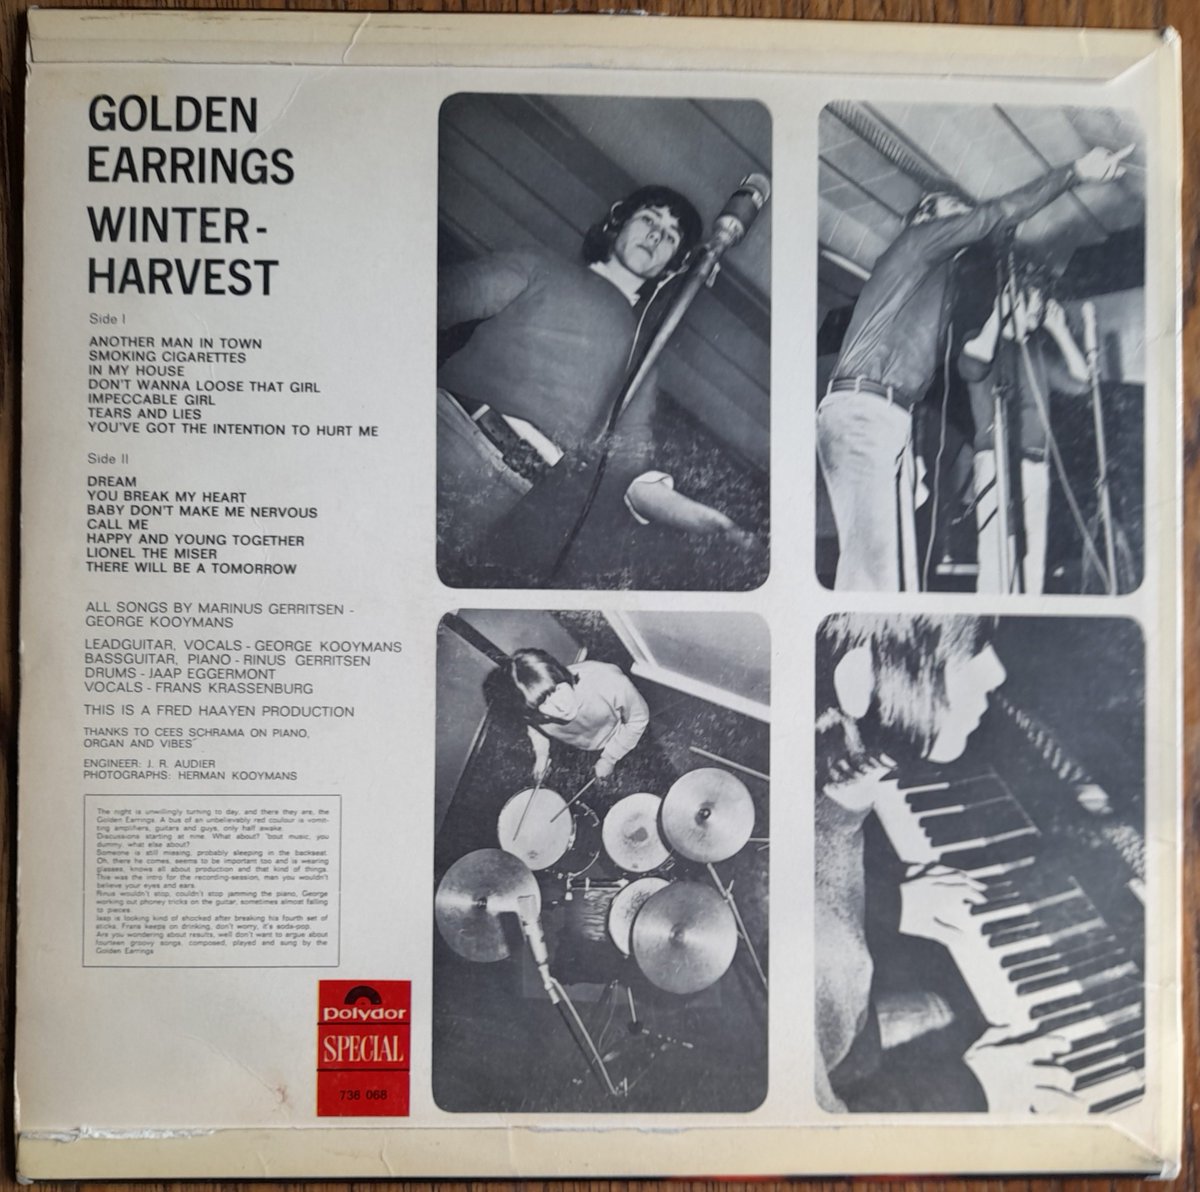 Issued January 1967. Winter-Harvest, the 2nd LP by the Netherlands’ Golden Earrings. One of the greatest mod-pop albums from anywhere – their own thing, seamless absorption of Small Faces and Zombies too. Single from the album, Another Man In Town: youtube.com/watch?v=8Sn1A-…